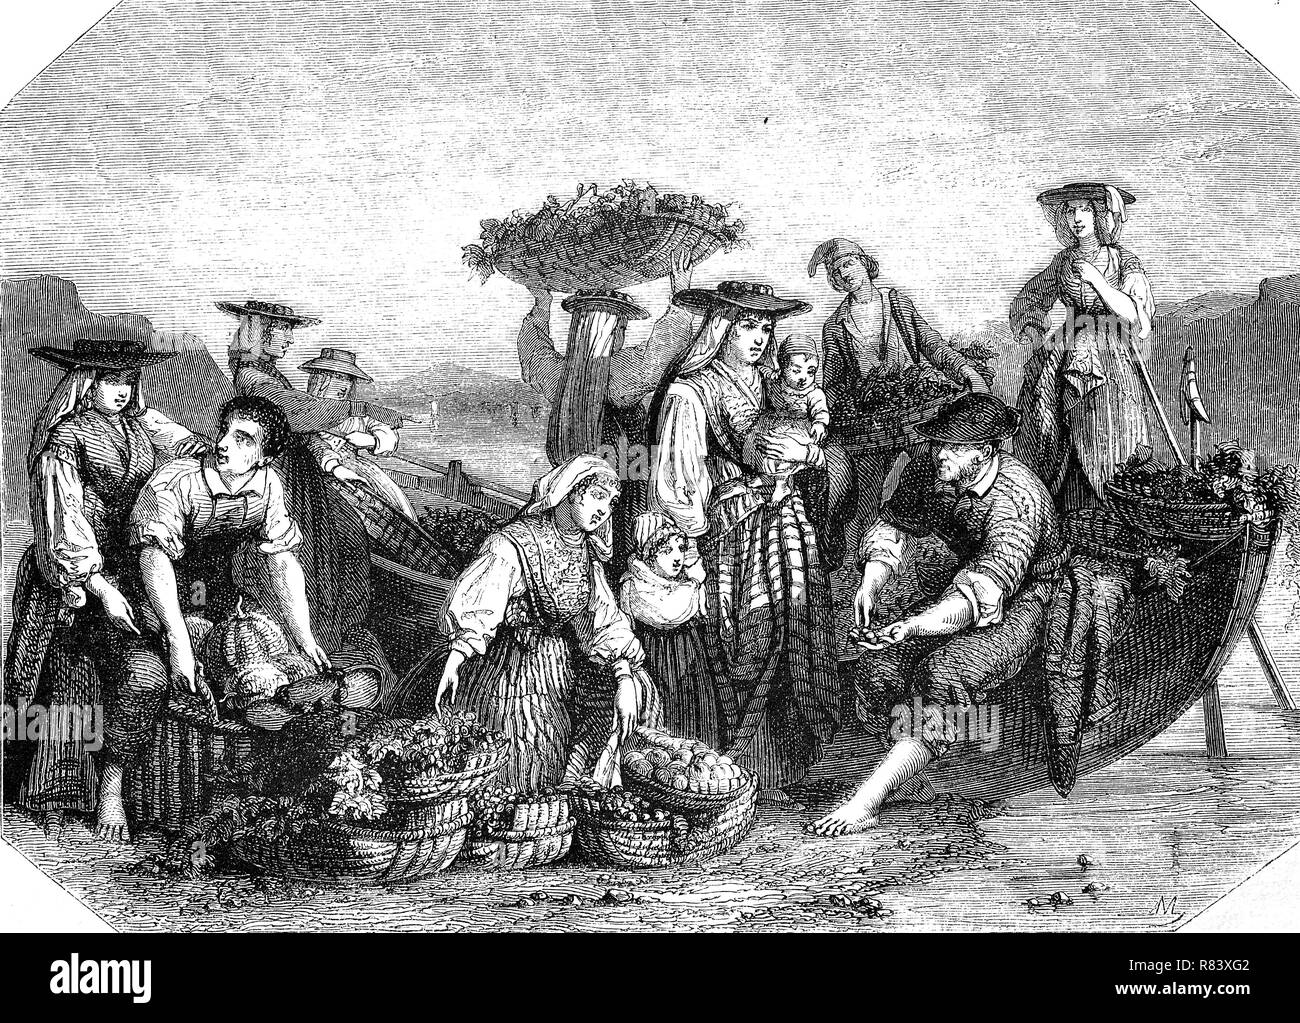 Digital improved reproduction, portugal, farmers bring the fruits to the market, Portugal, Bauern bringen die Früchte zum Markt, from an original print from the year 1855 Stock Photo